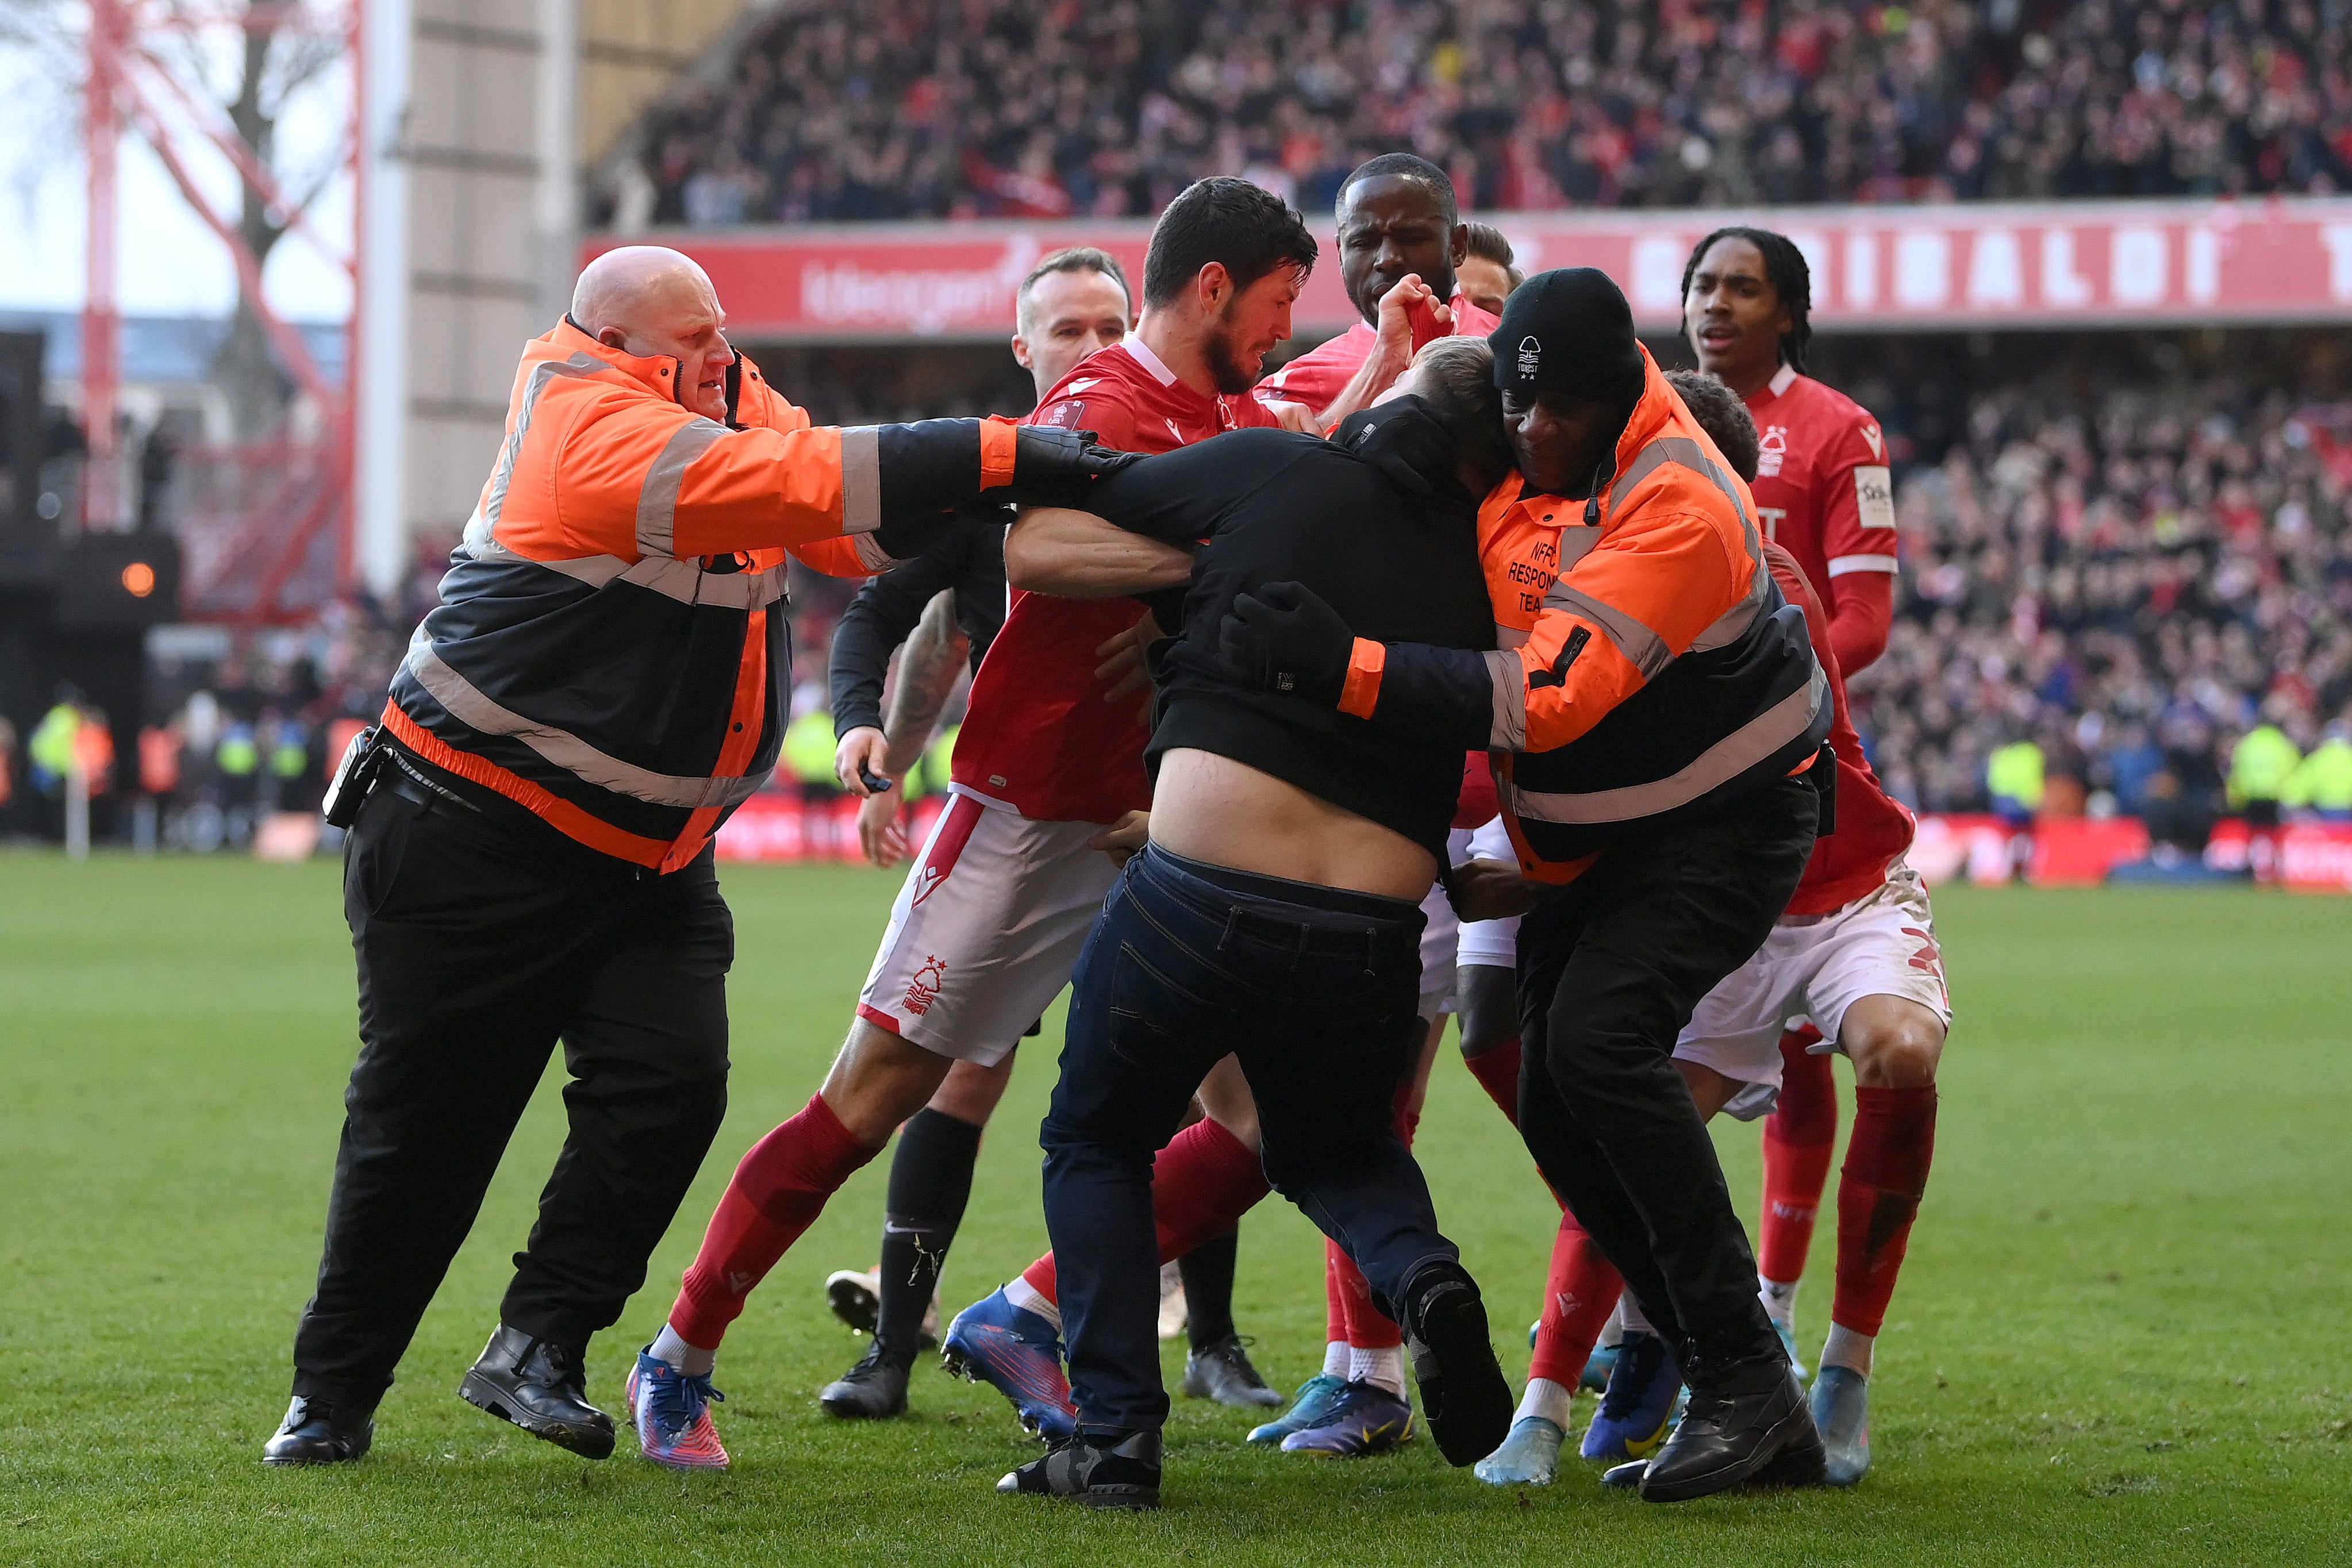 A fan entered the pitch and assaulted Forest players